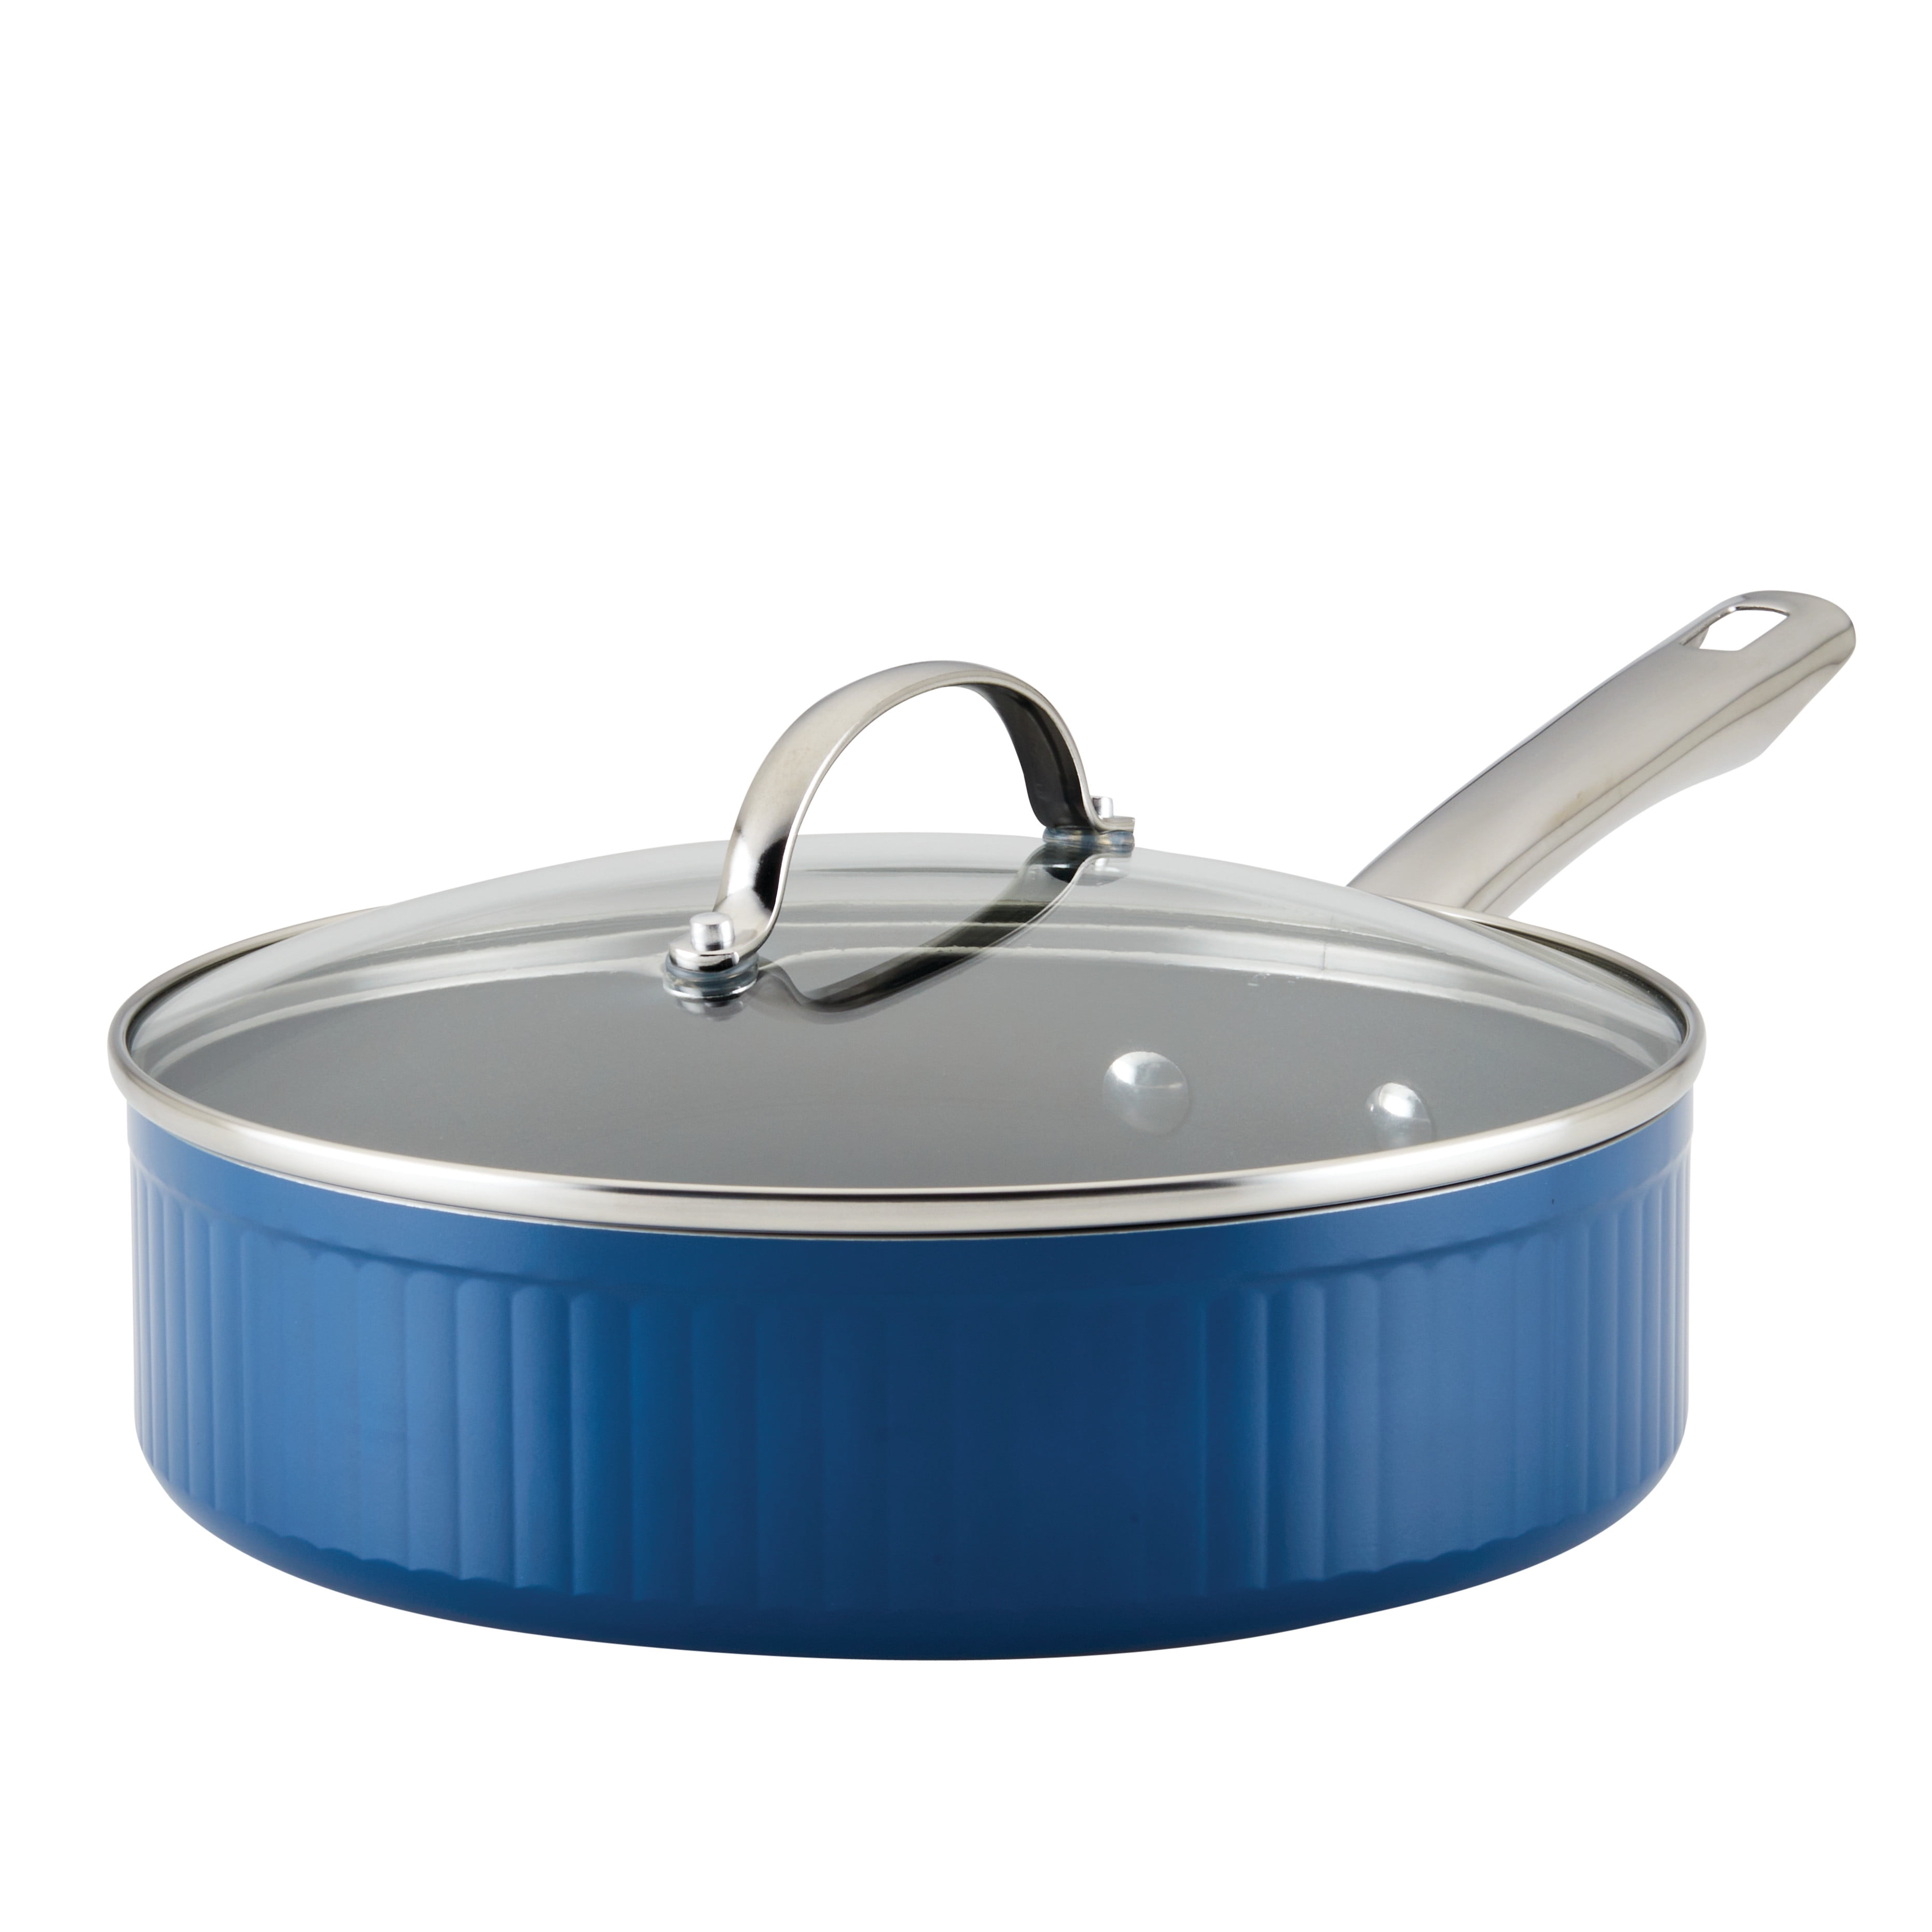 Style Nonstick Cookware Saute Pan with Lid, 3-Quart, Blue